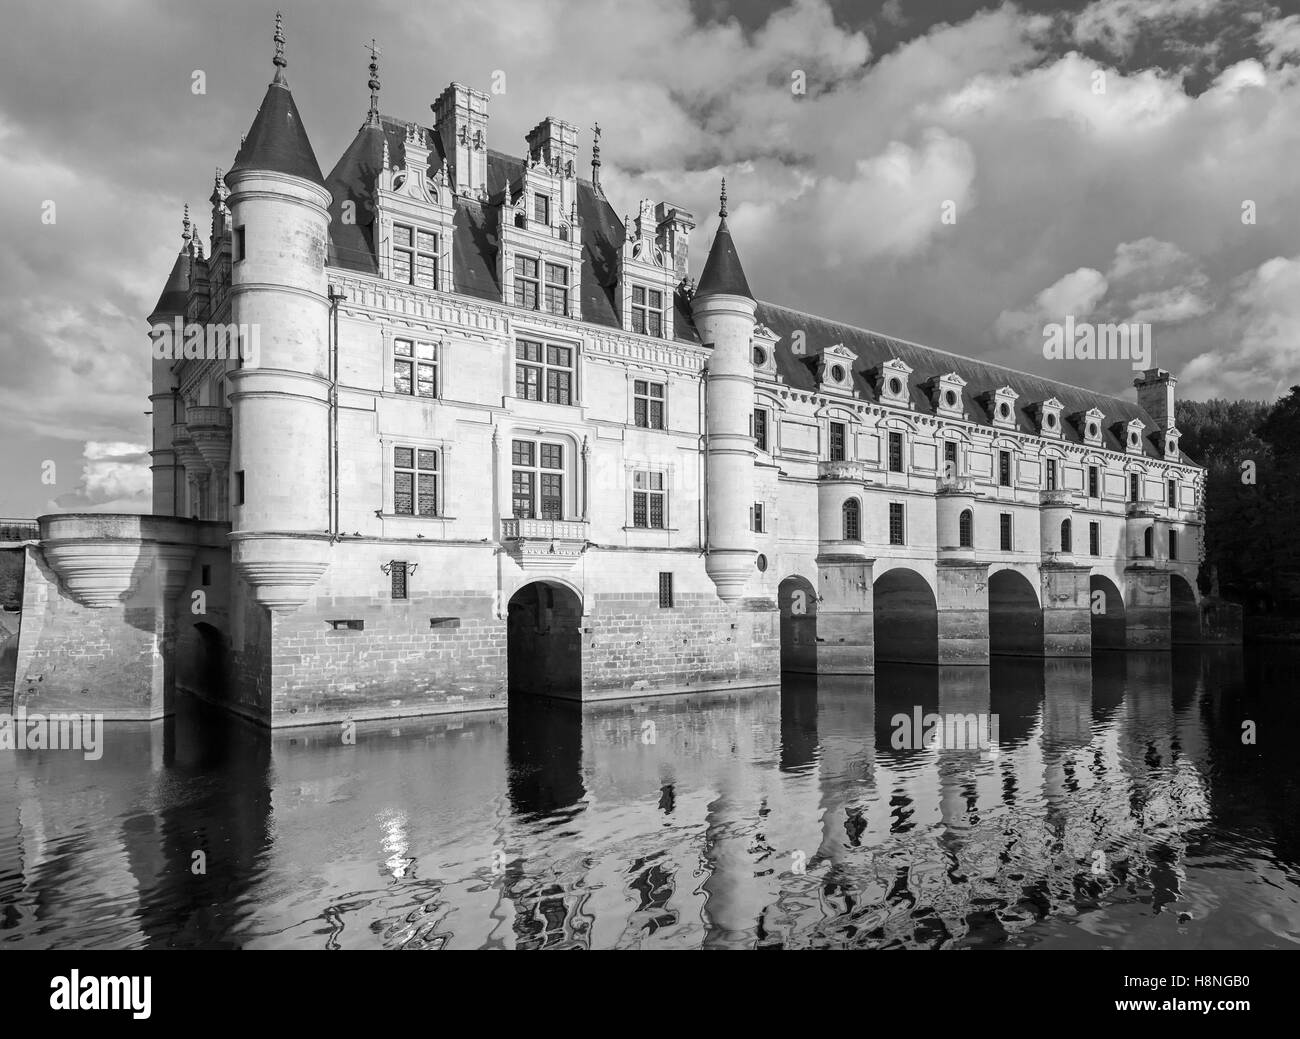 The Chateau de Chenonceau facade, medieval french castle in Loire Valley, France. It was built in 15-16 century, an architectura Stock Photo